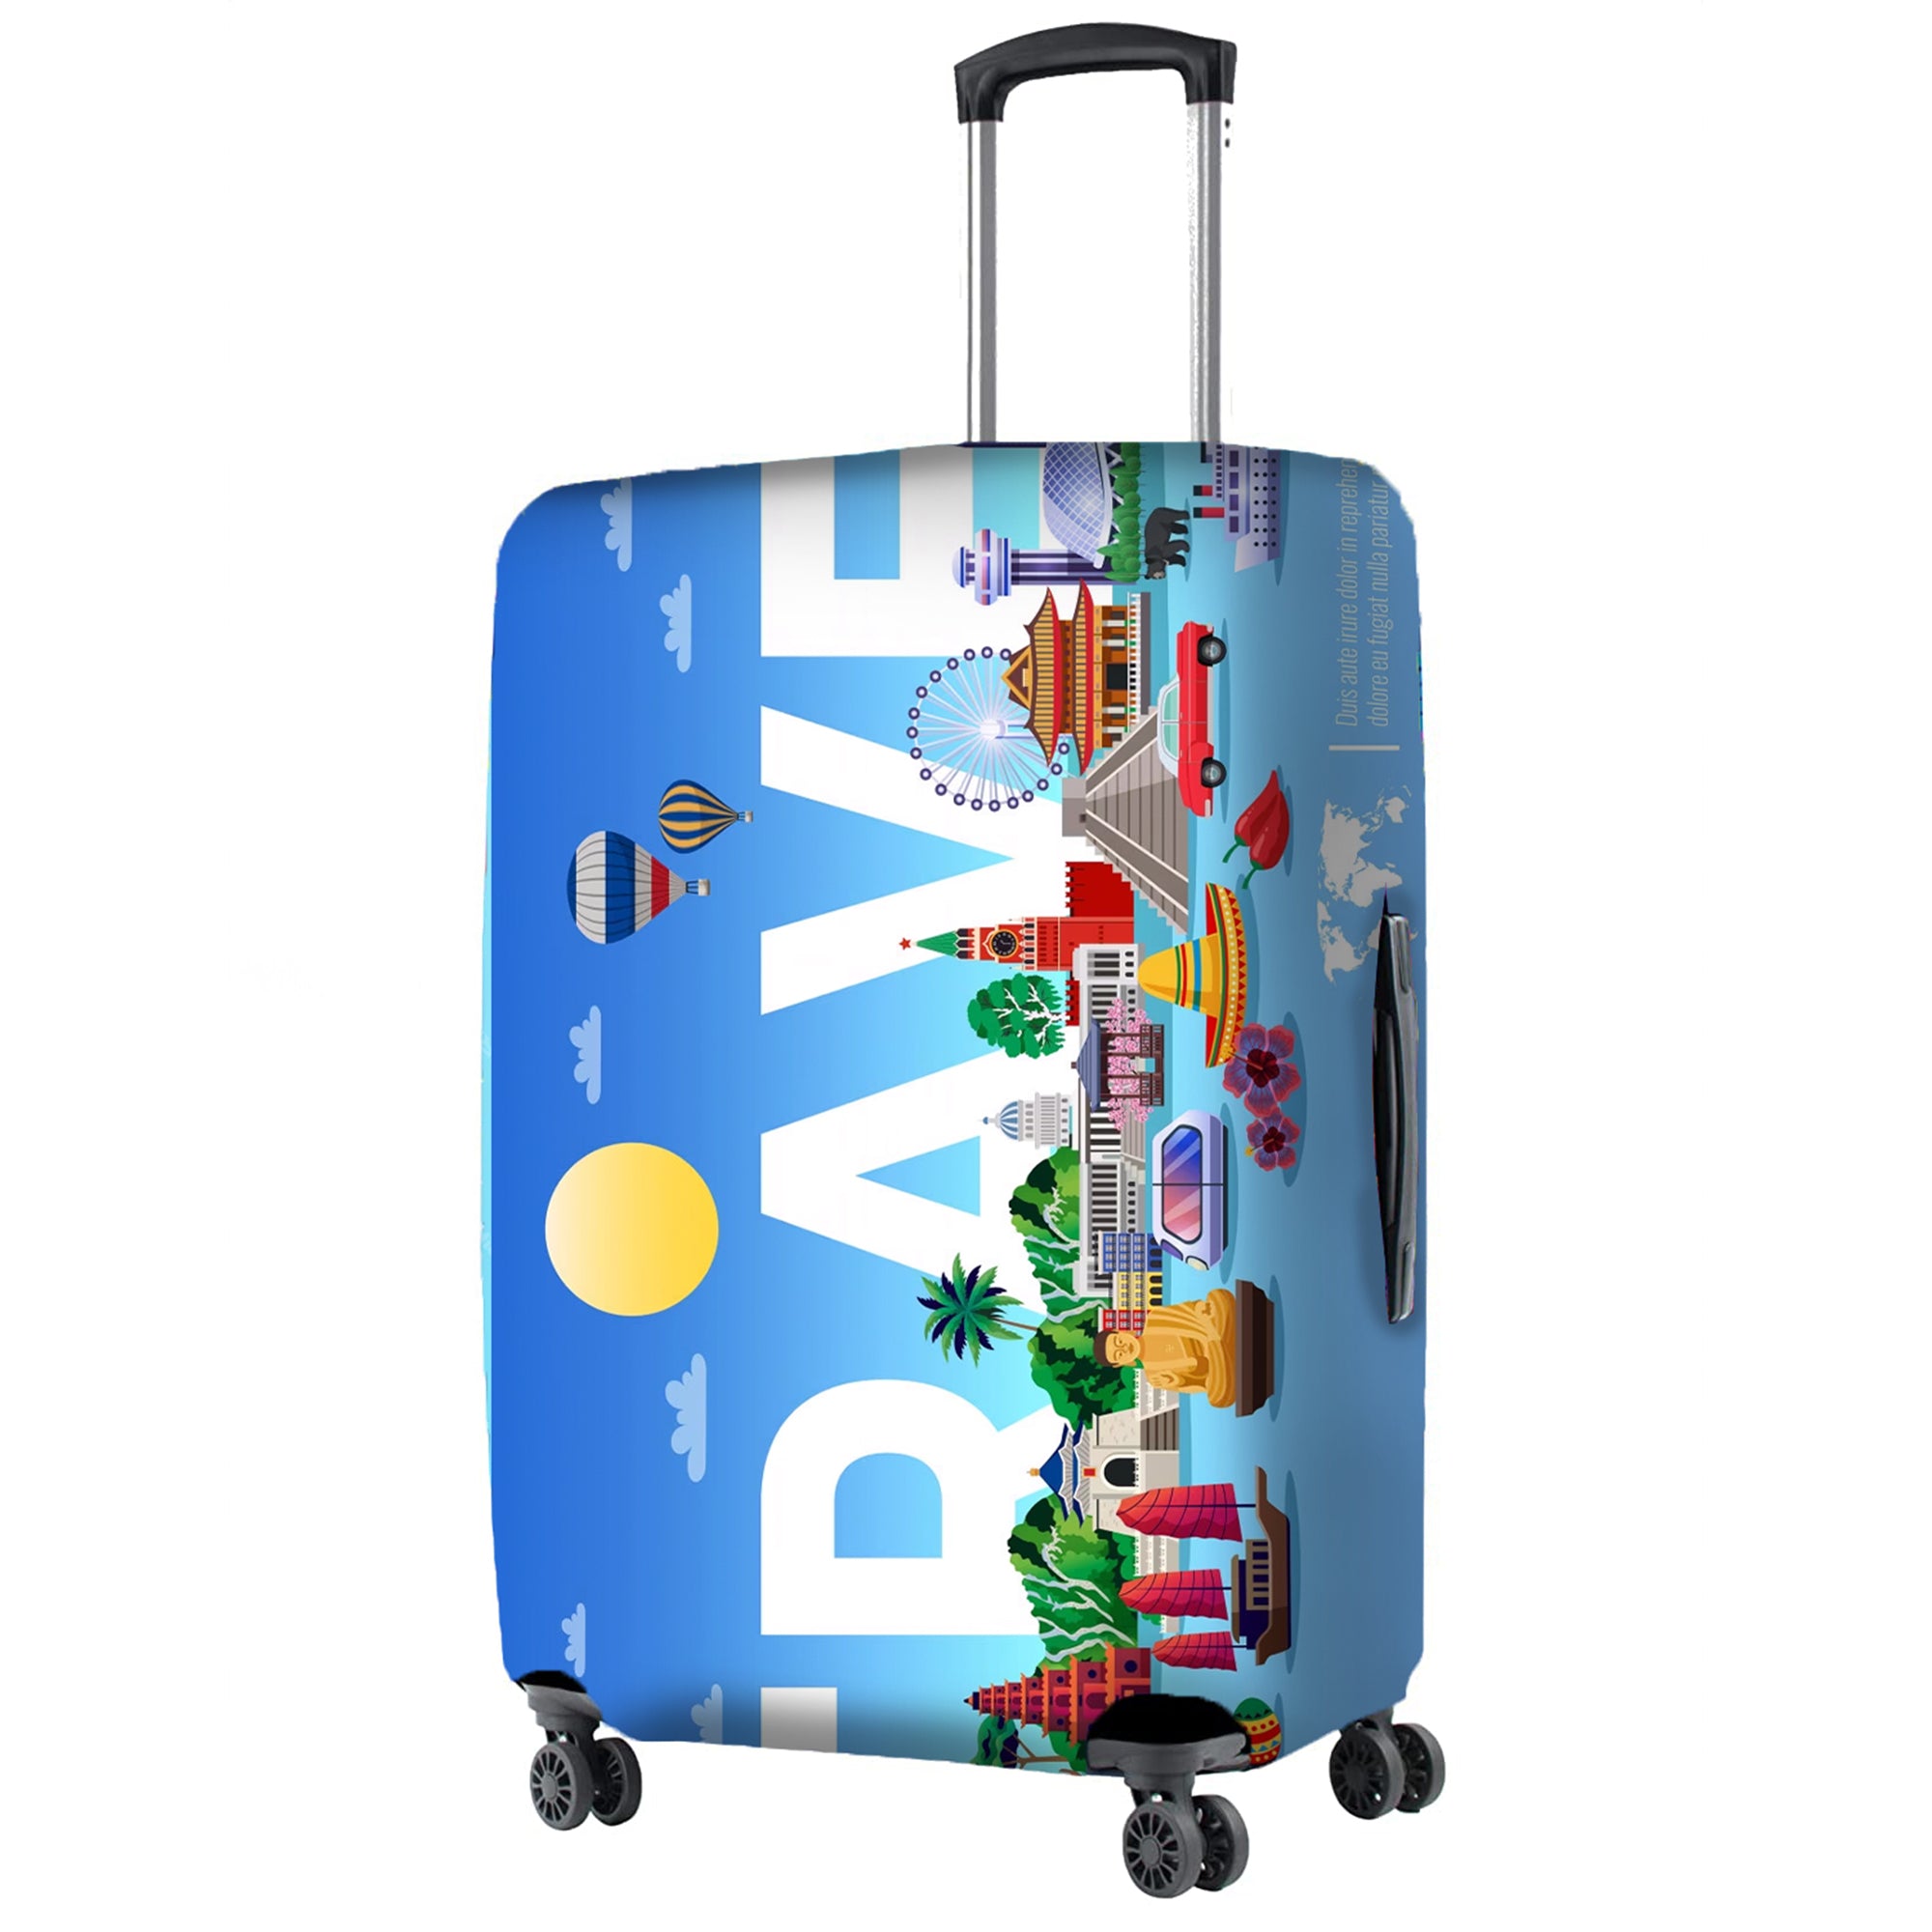 Buy Luggage Cover Online at Best Price on Nasher Miles